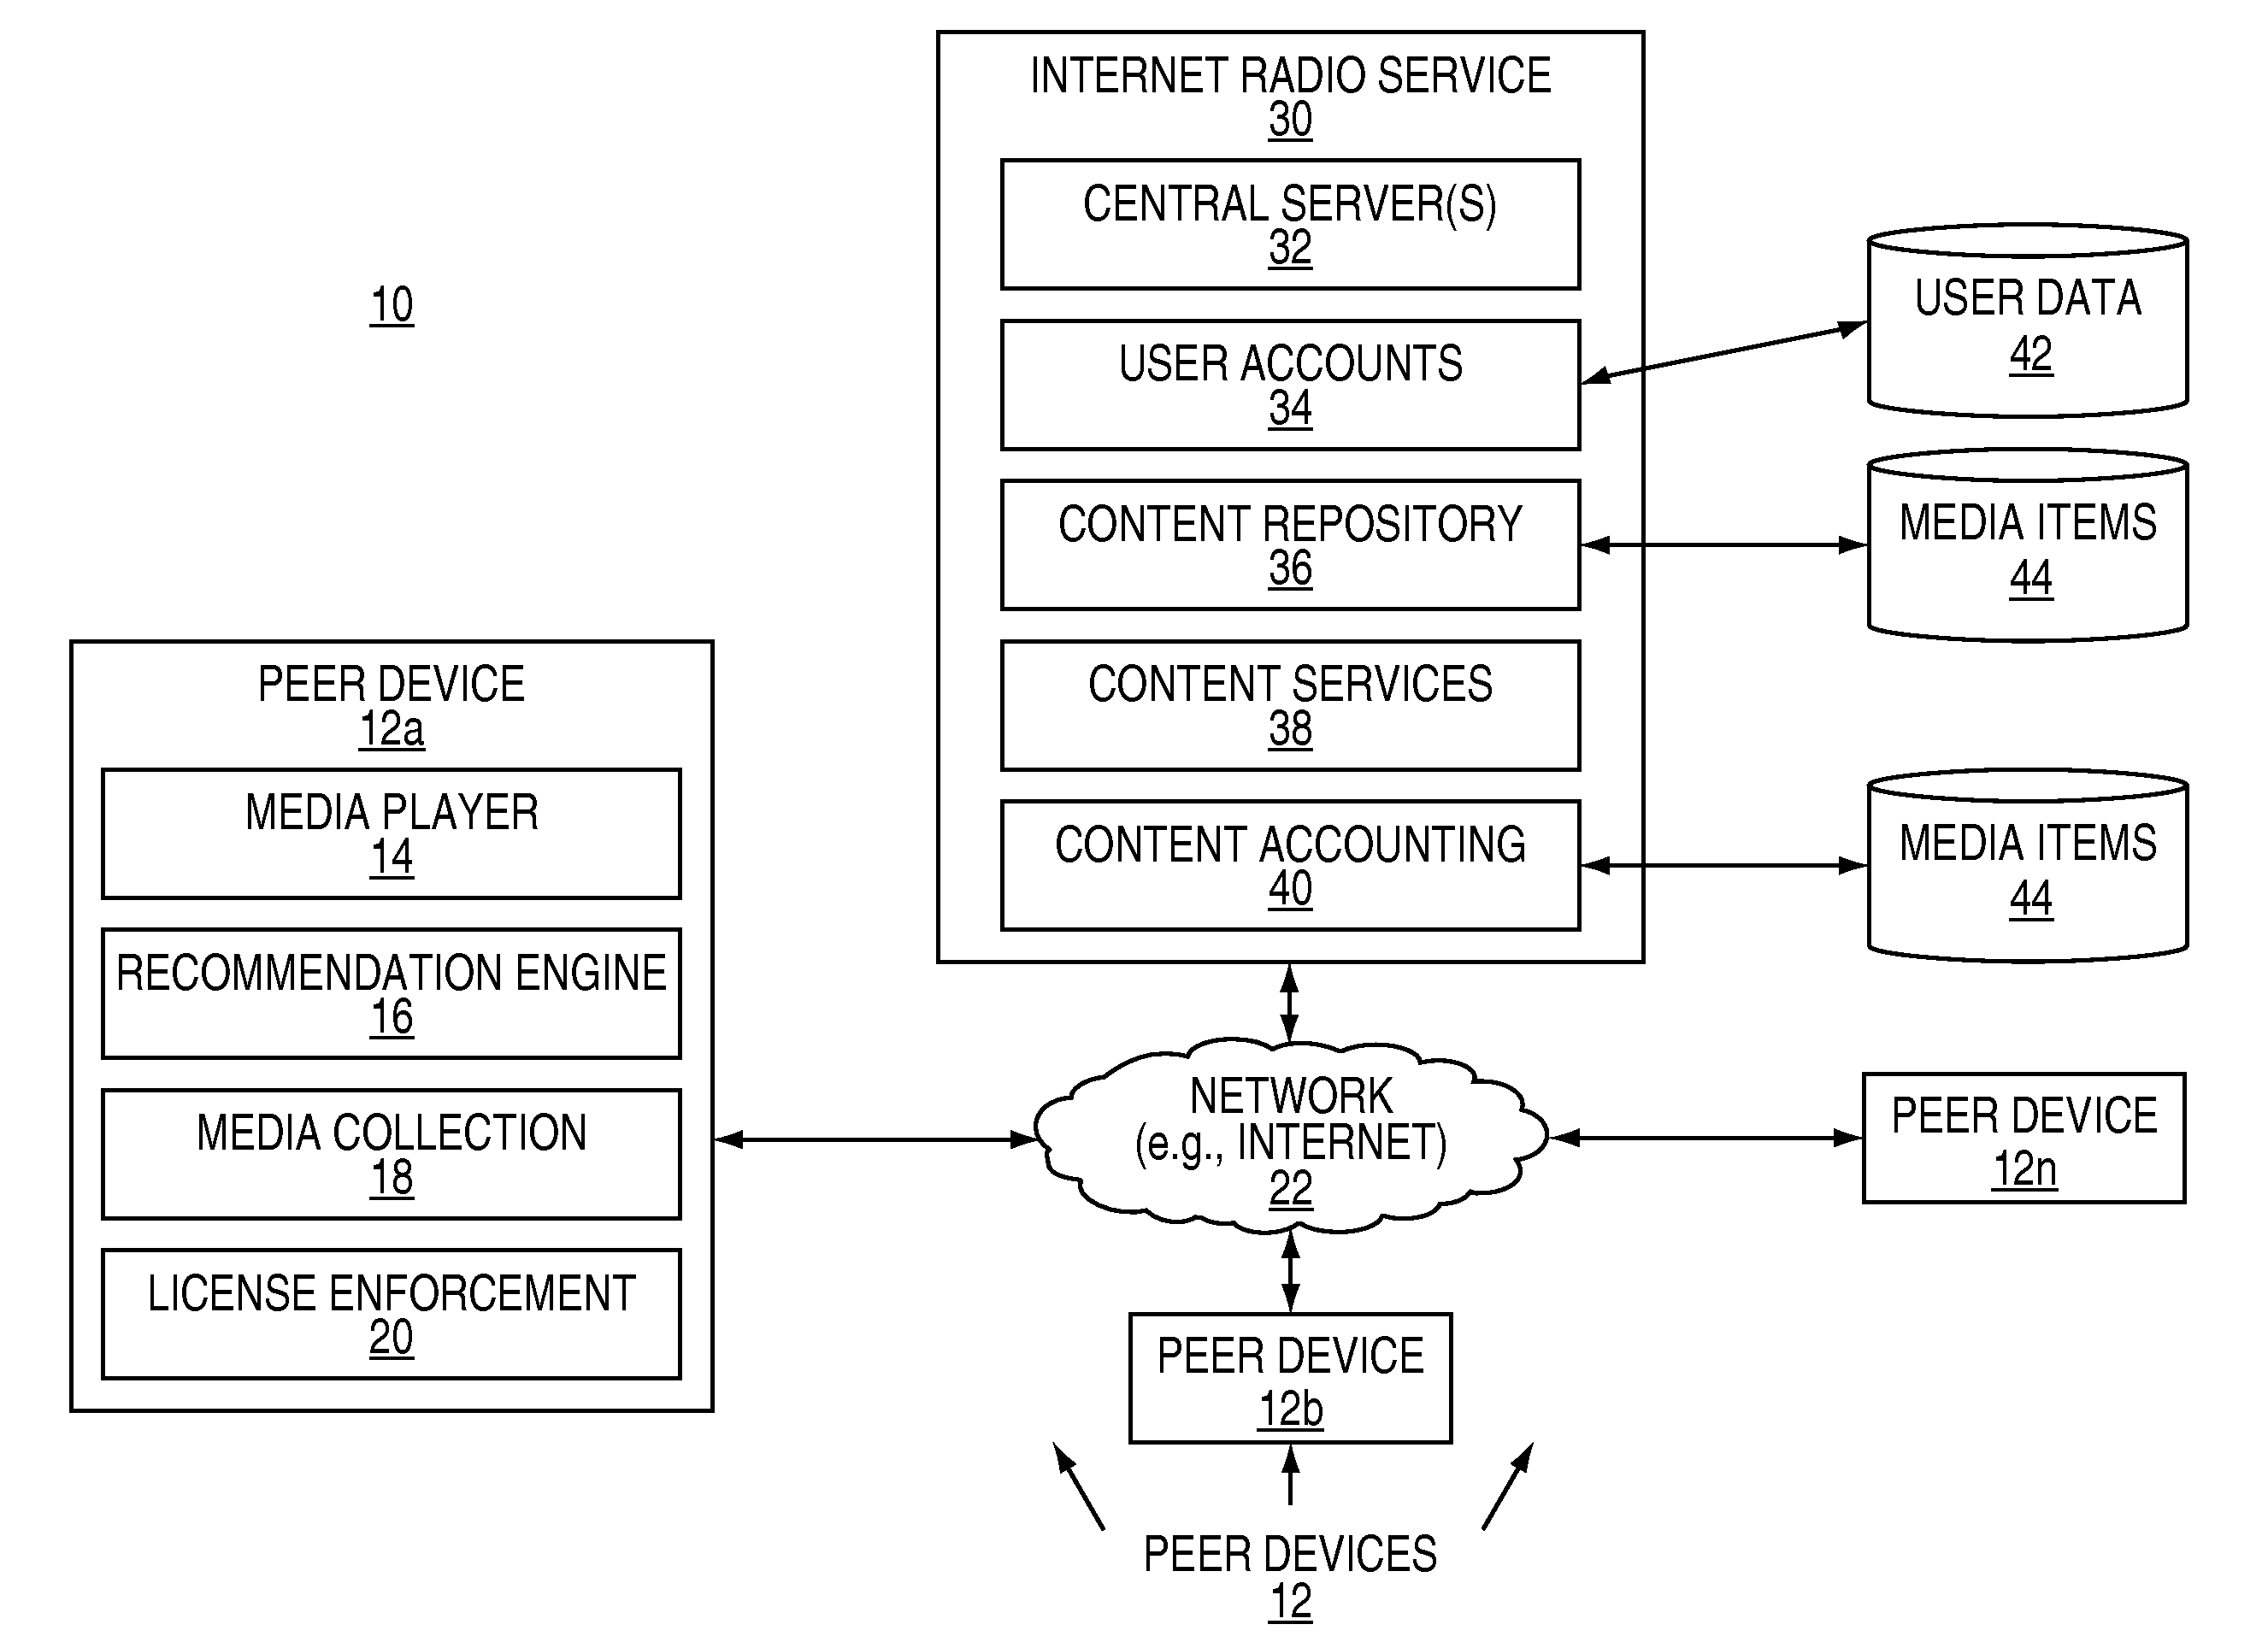 Method and system for populating a content repository for an internet radio service based on a recommendation network